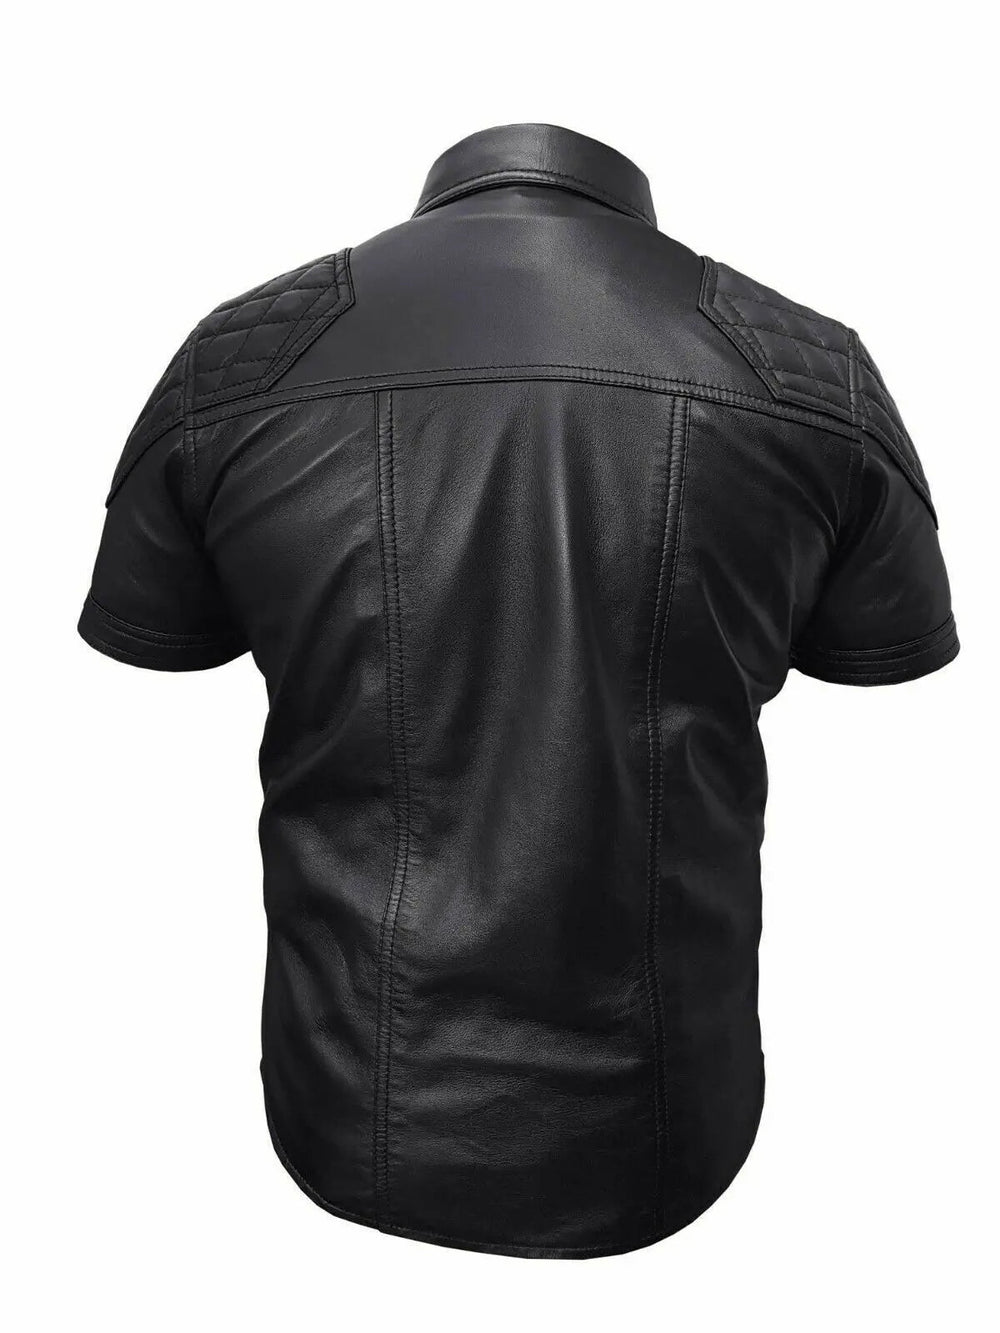 Men's Real Black Leather Police Uniform Style Shirt| All For Me Today